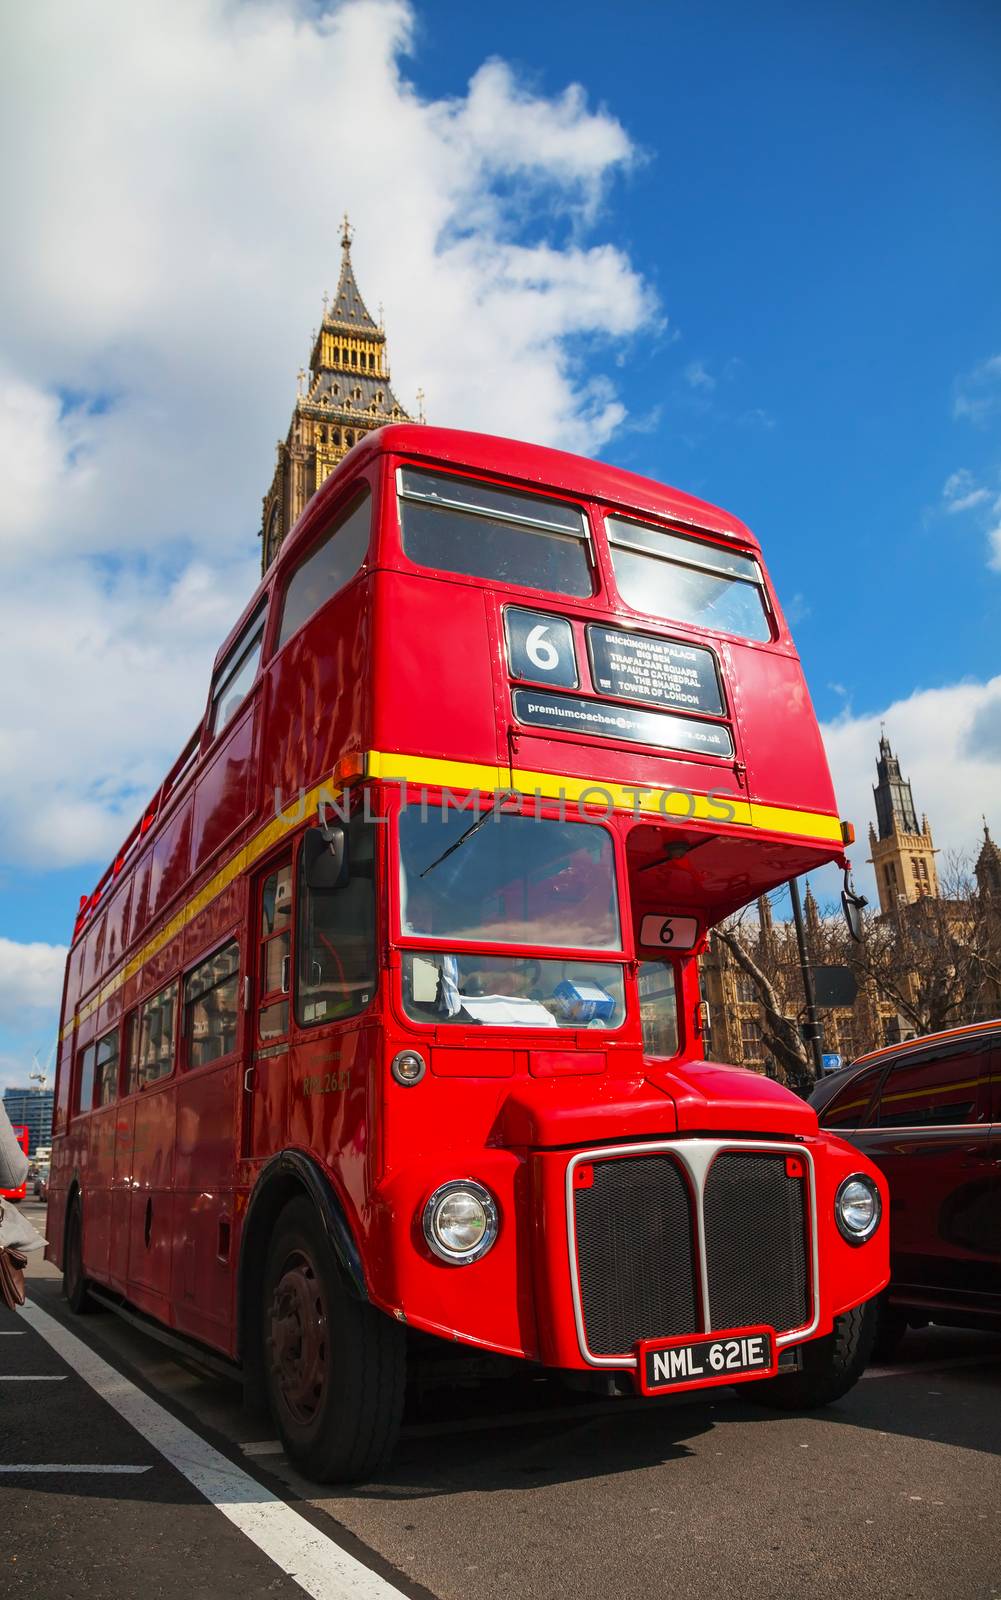 Iconic red double decker bus in London by AndreyKr